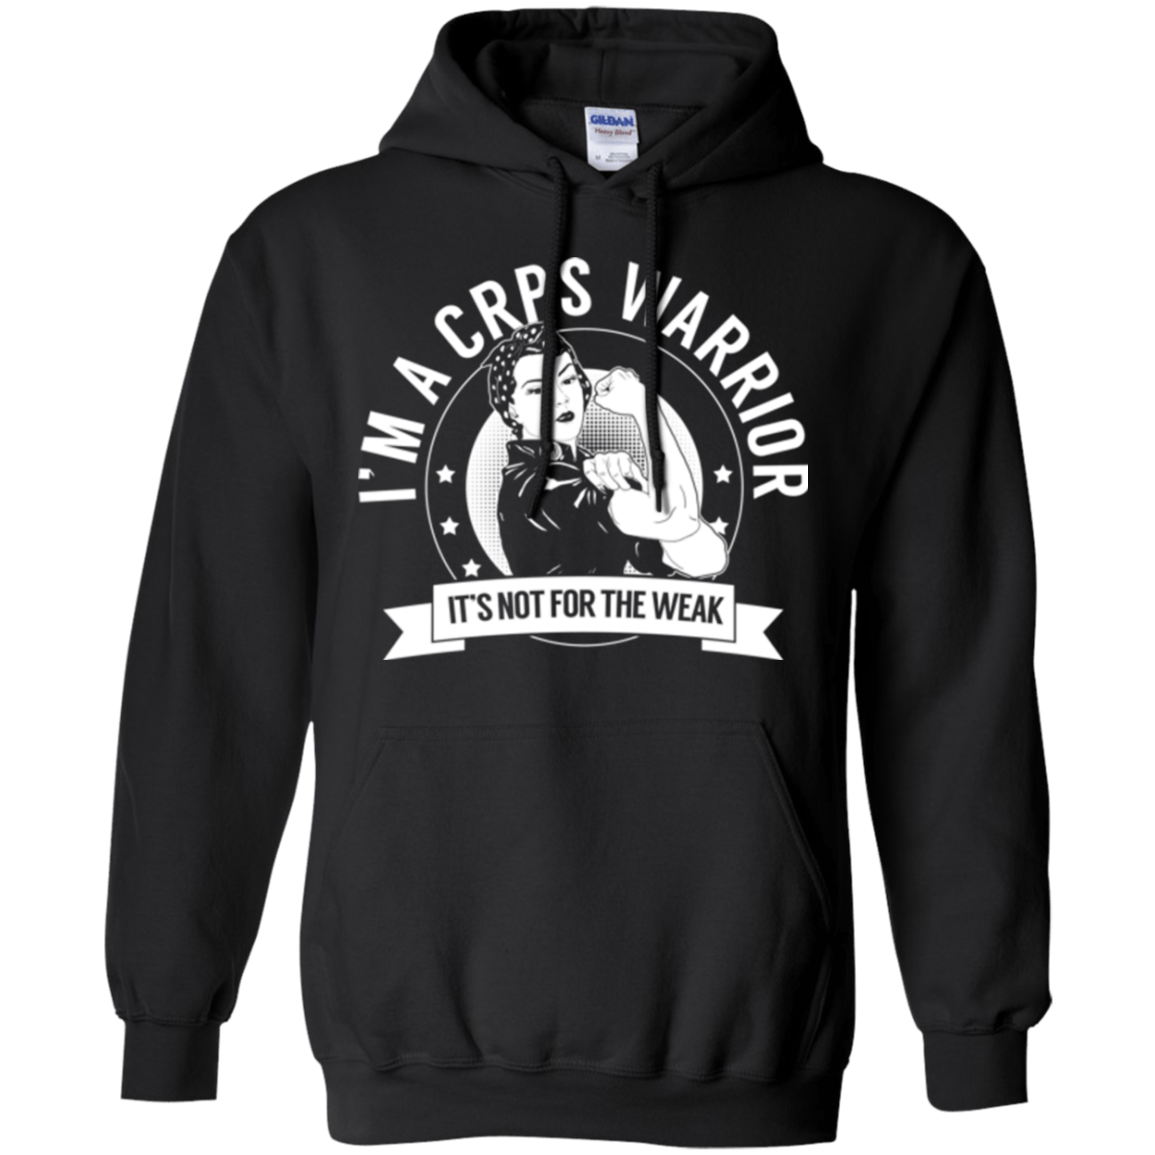 Complex Regional Pain Syndrome - CRPS Warrior Not For The Weak Pullover Hoodie 8 oz. - The Unchargeables